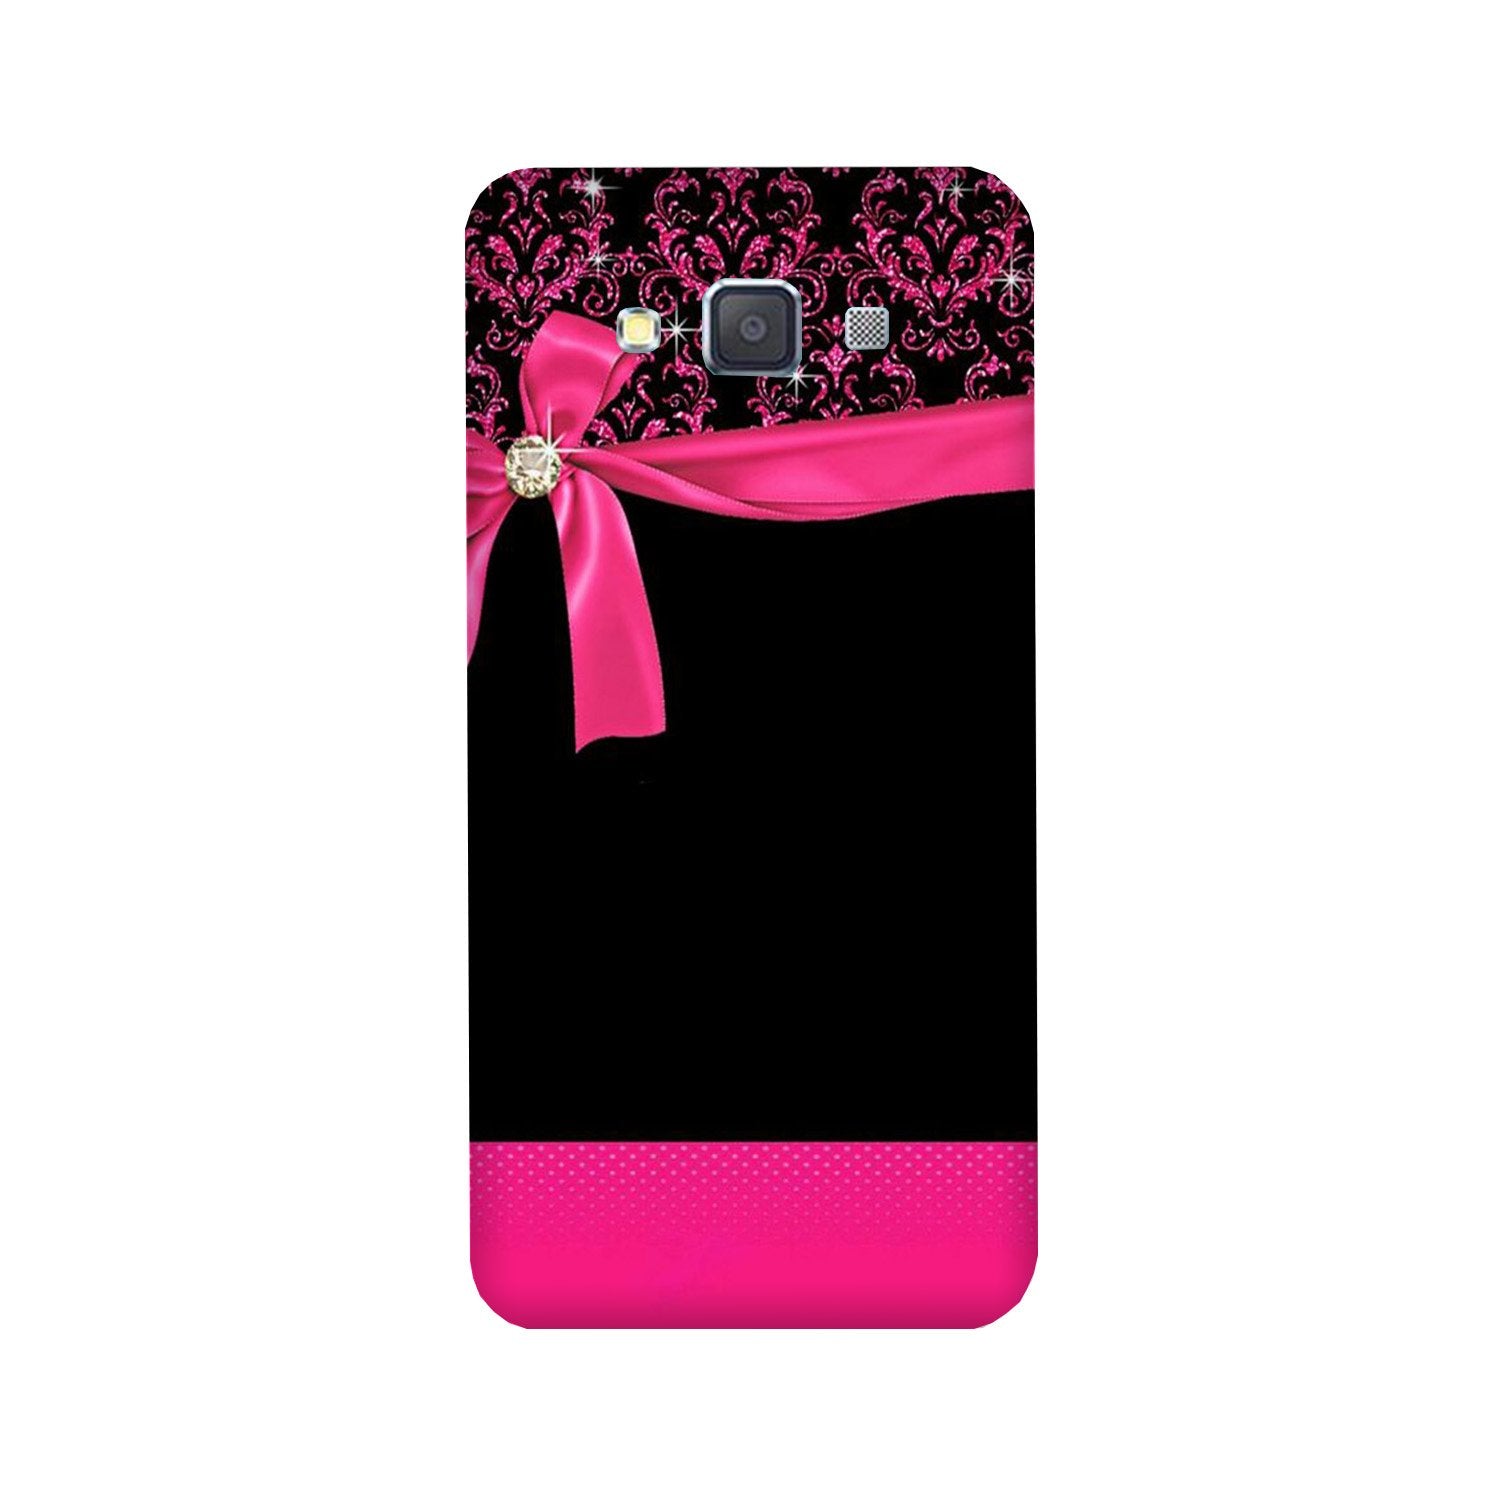 Gift Wrap4 Case for Galaxy Grand Max